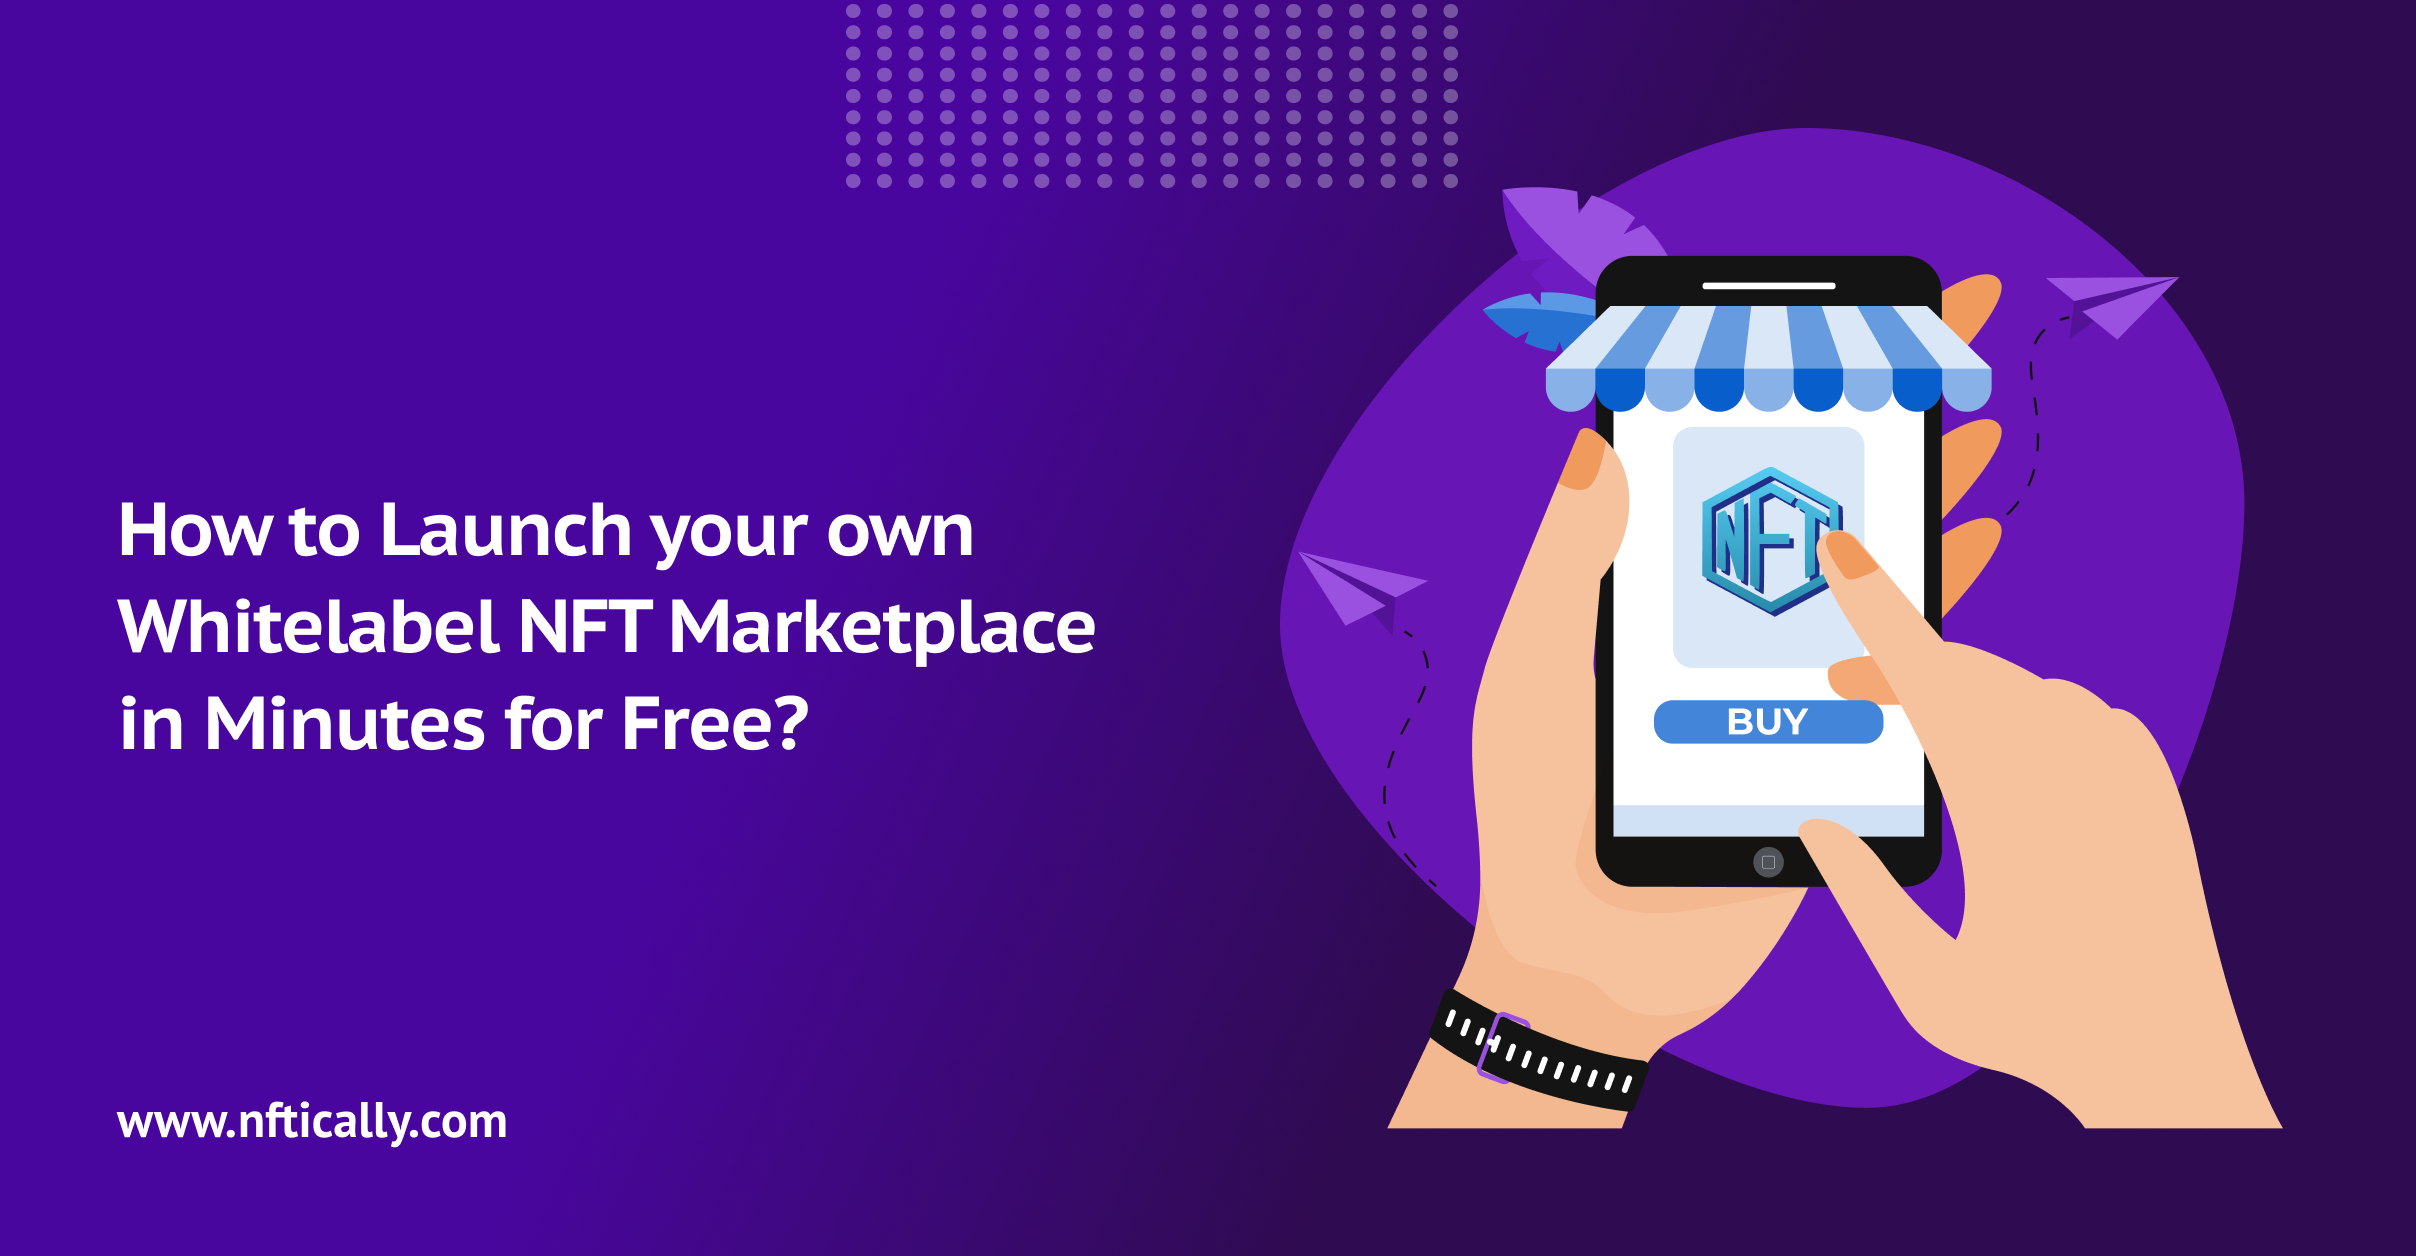 How to Launch your own Whitelabel NFT Marketplace in Minutes for Free?